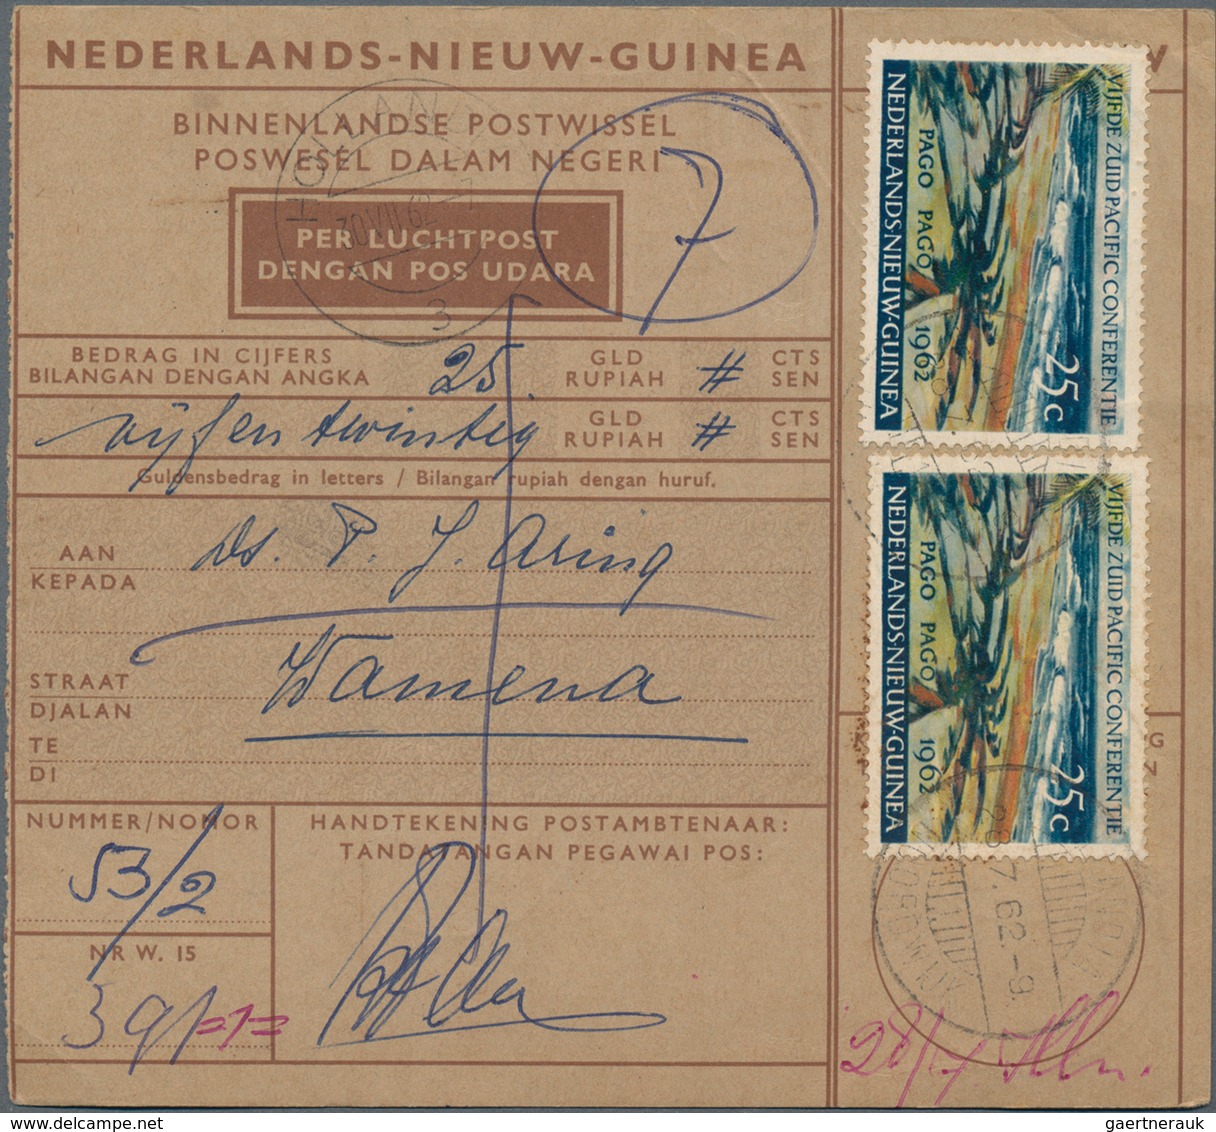 Niederländisch-Neuguinea: 1962, 14 Postal Money Orders Including Two With Meter Marks And One Postag - Niederländisch-Neuguinea